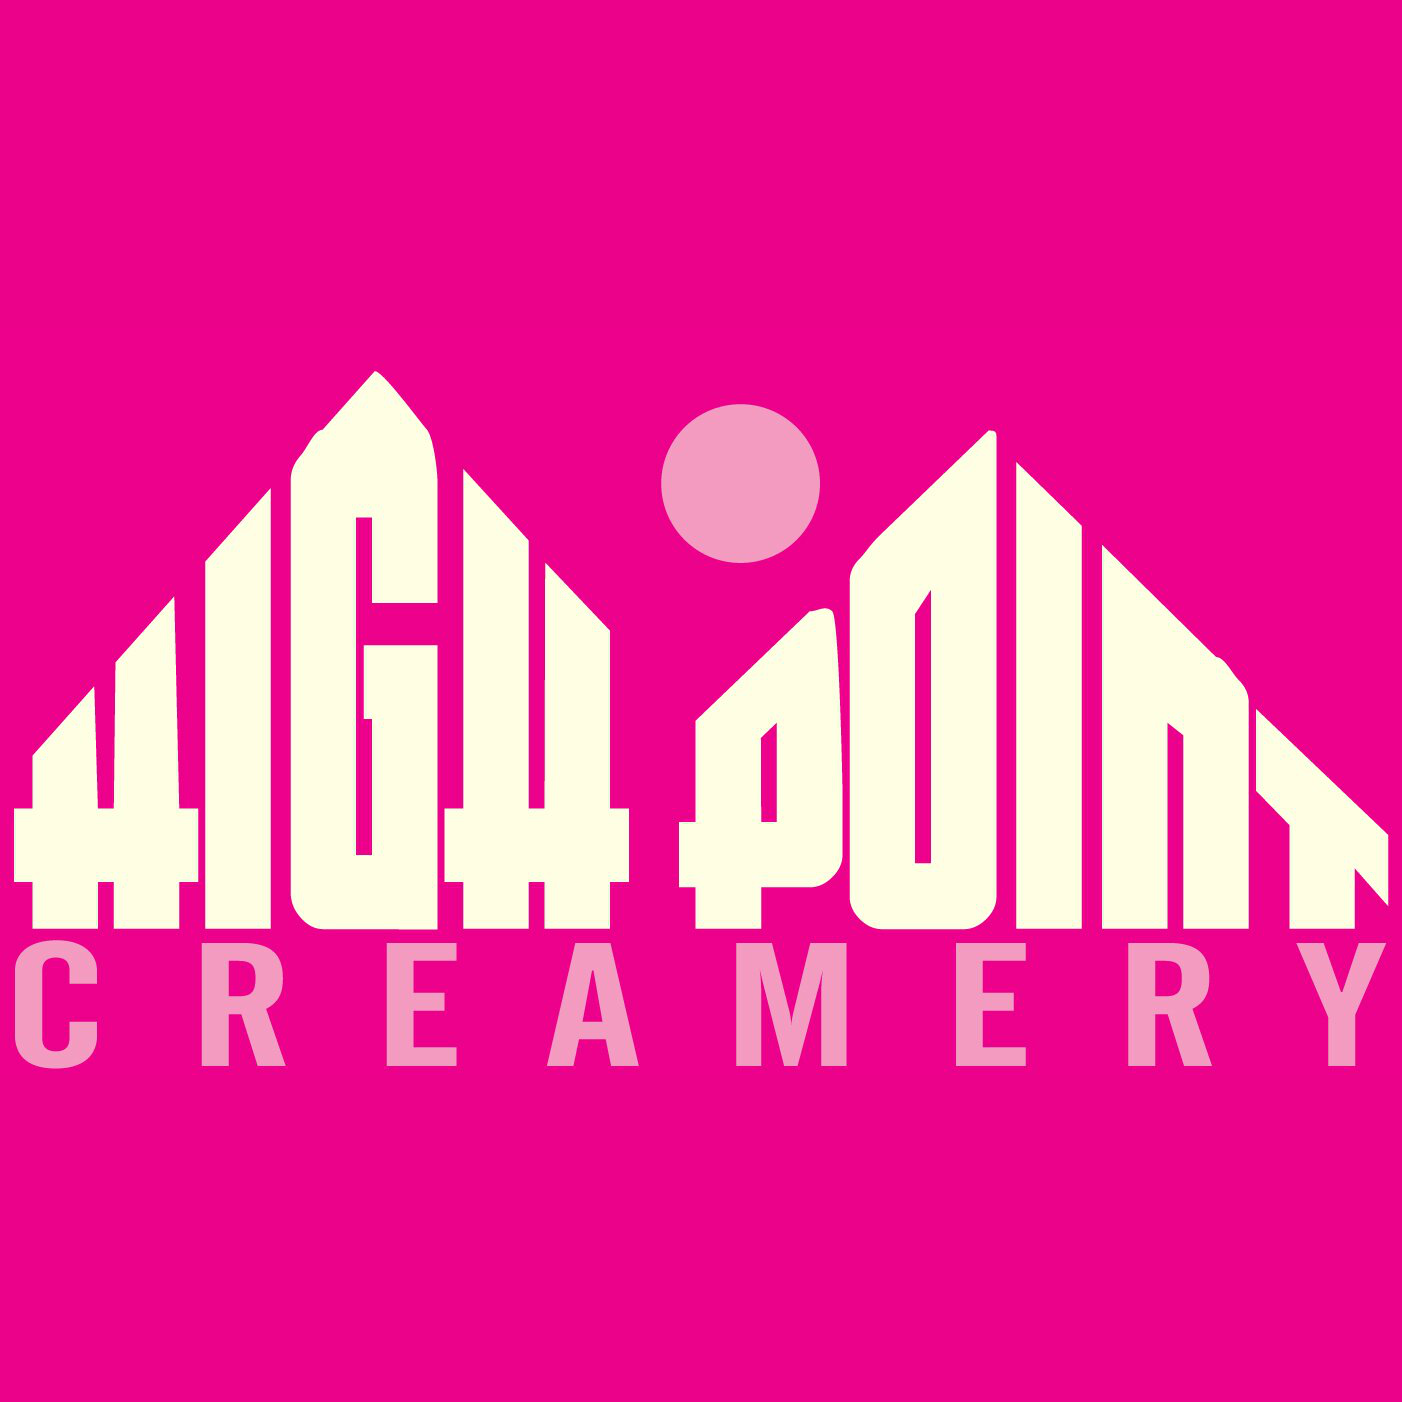 Lavishly Crafting Joy Since 2014 | Home of the Ice Cream Flight | Our 3 locations - 215 S. Holly, 3977 Tennyson & @DenCentralMkt | Meet #BigPinky on the road!